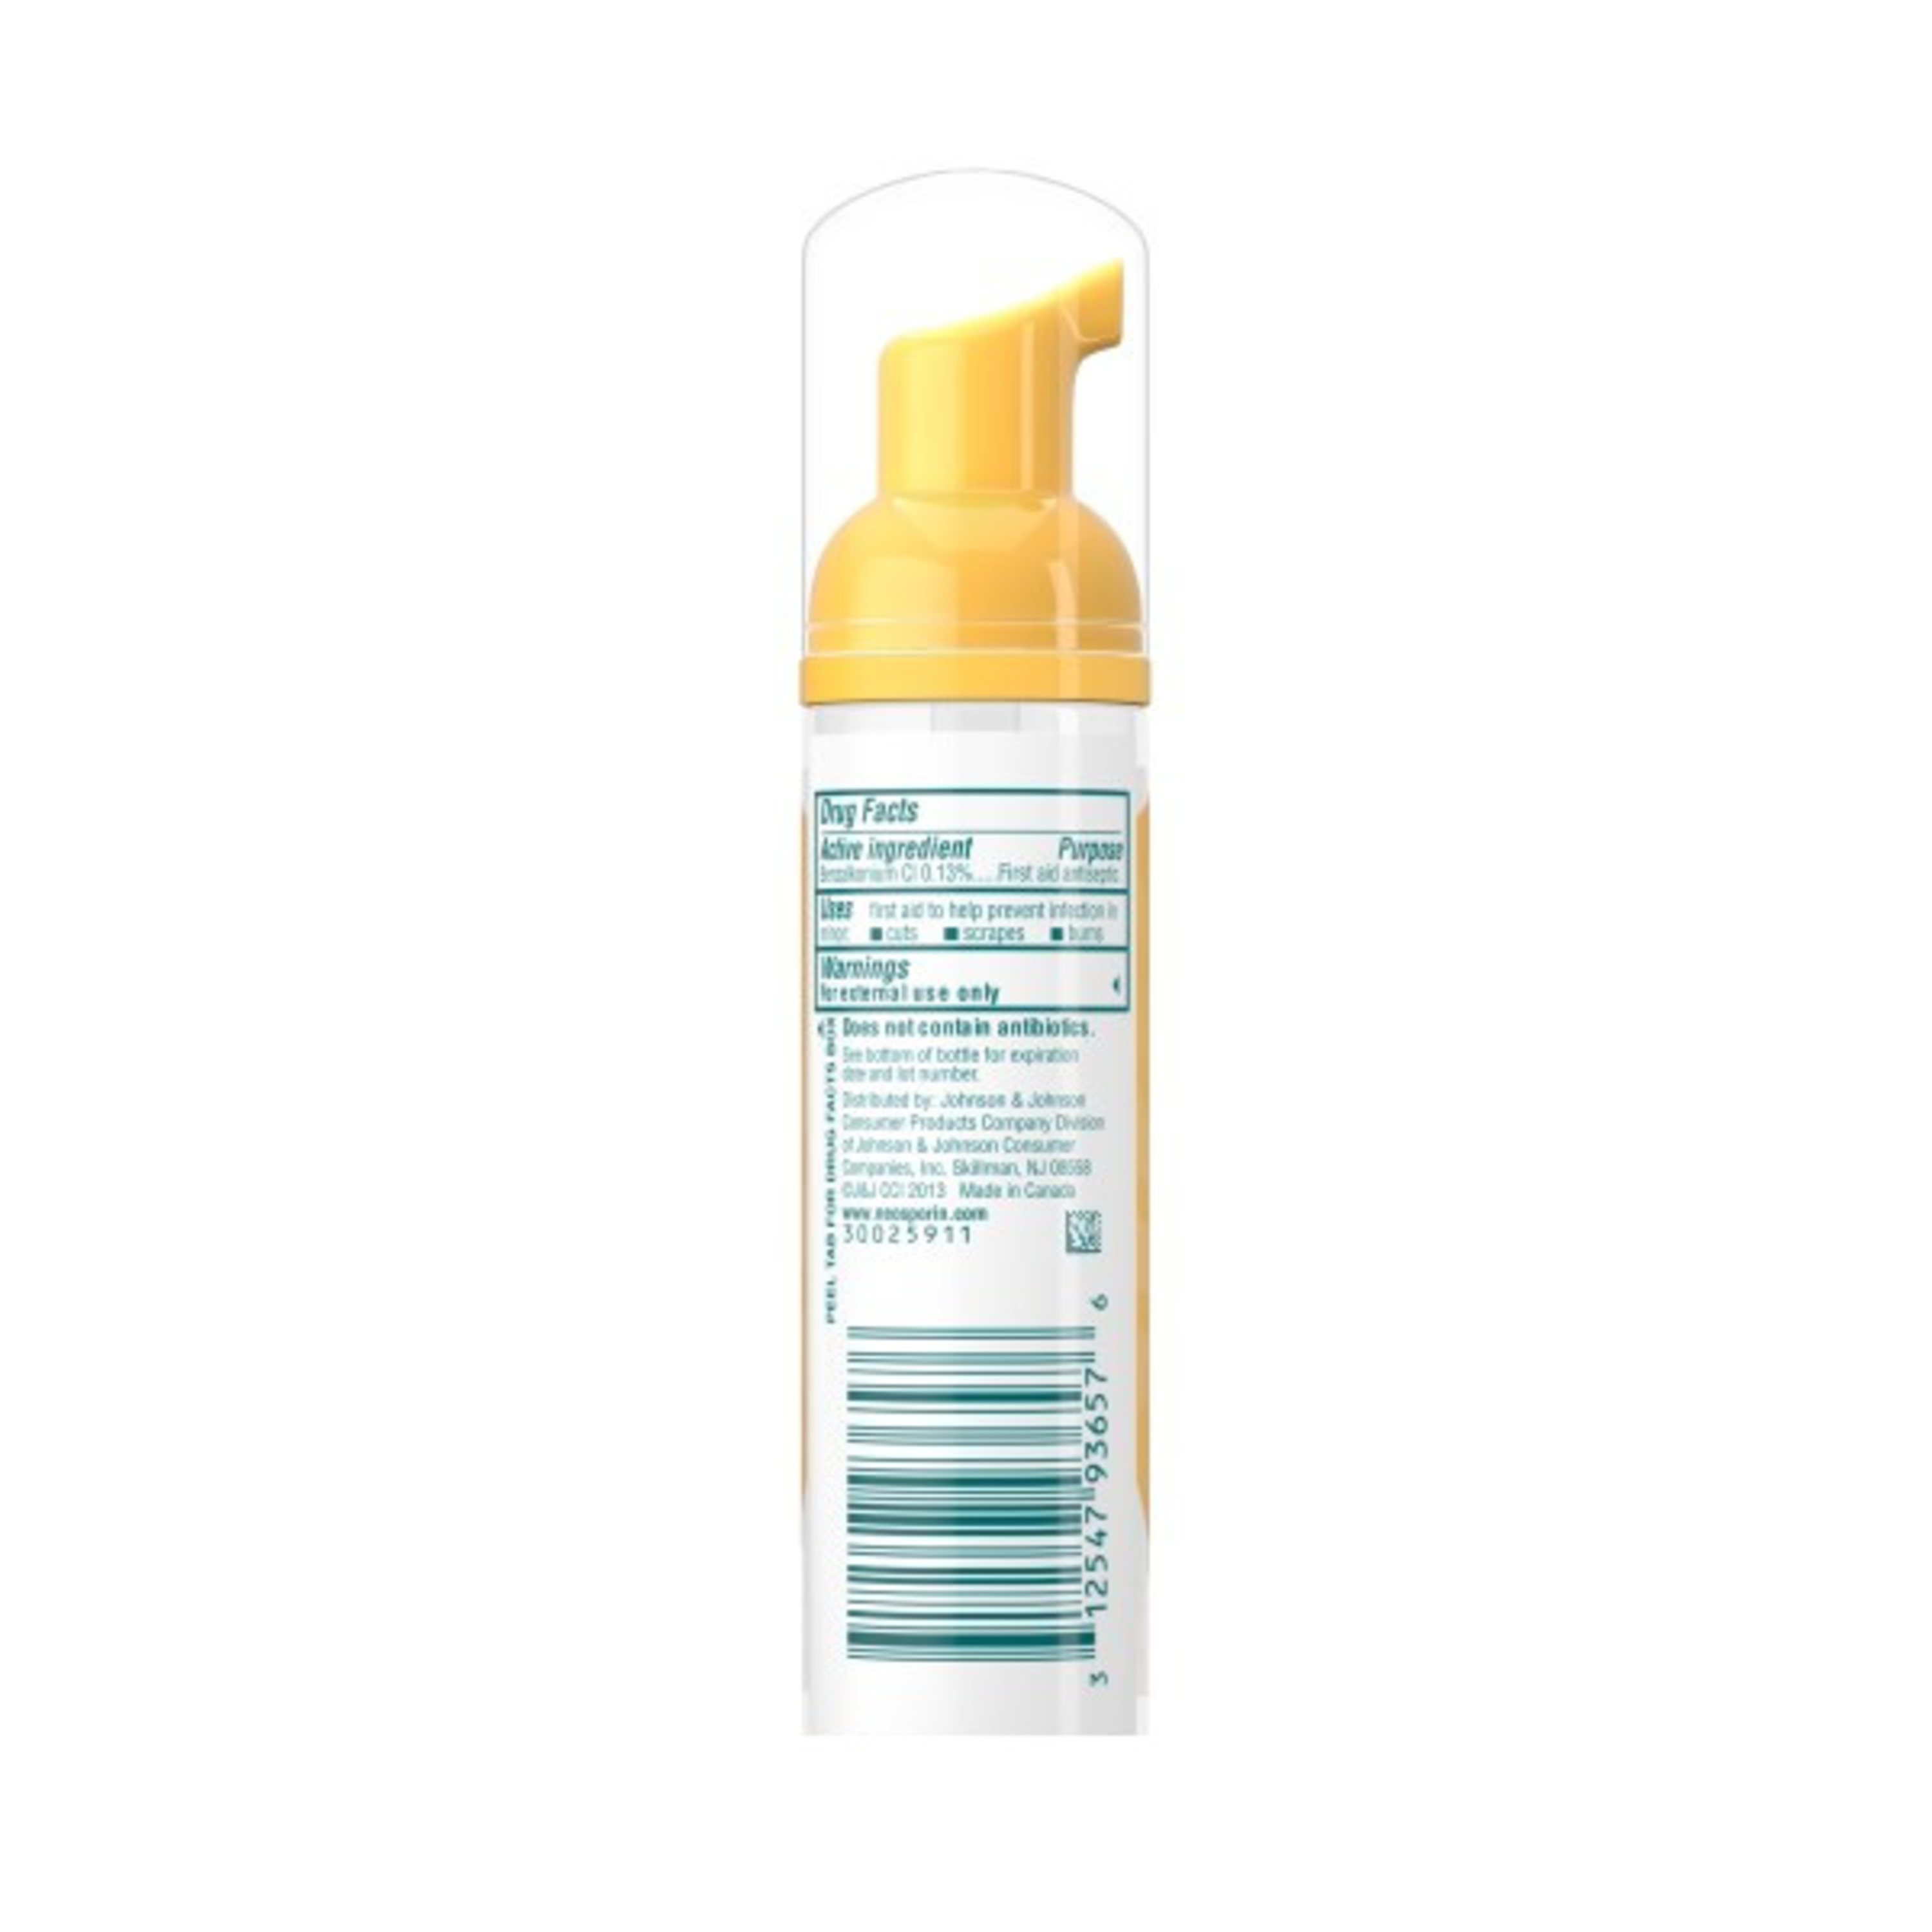 Neosporin Wound Cleanser For Kids To Help Kill Bacteria, 2.3 Oz - image 5 of 9